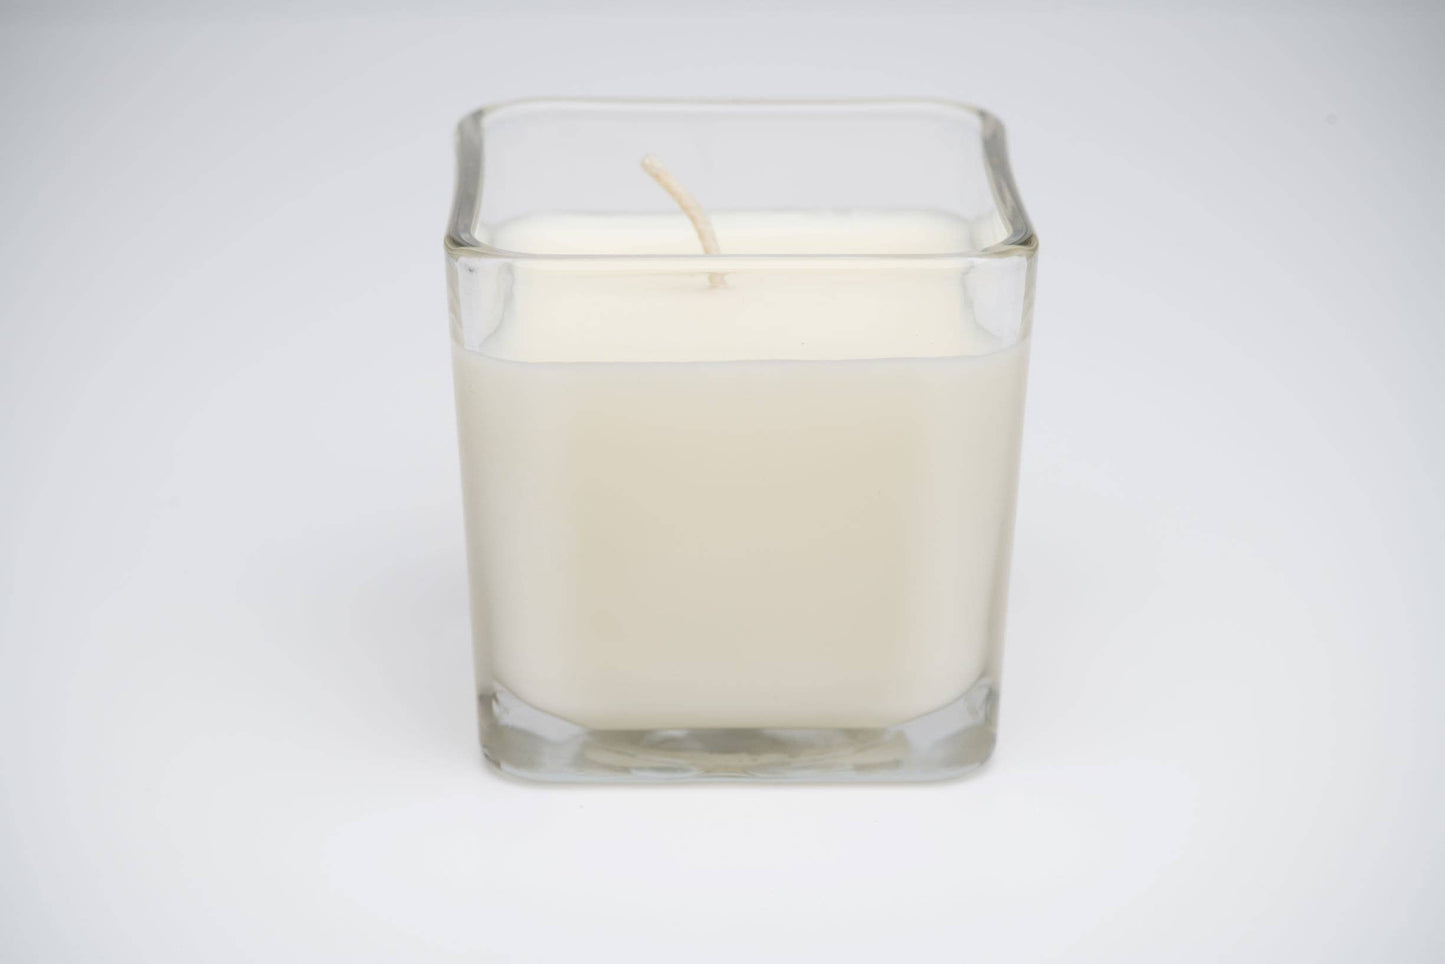 Creative Energy Candles - Warm Tobacco & Coriander: 2-in-1 Soy Lotion Candle: Medium - 6 oz